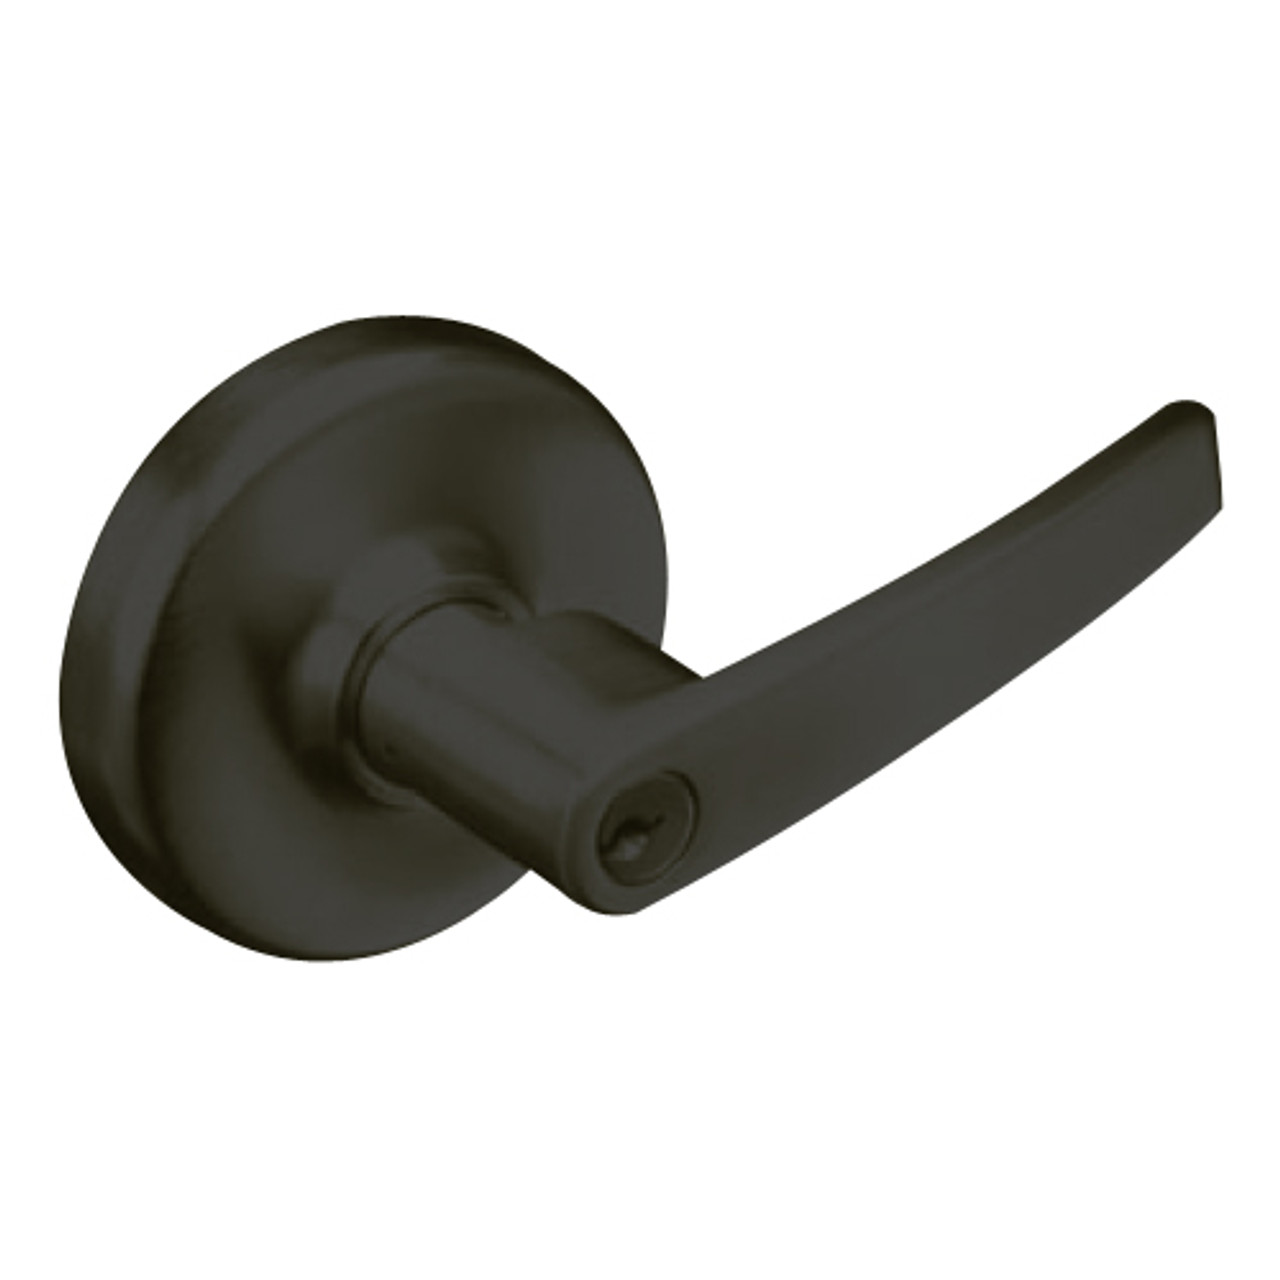 CL3151-AZD-613 Corbin CL3100 Series Vandal Resistant Entrance Cylindrical Locksets with Armstrong Lever in Oil Rubbed Bronze Finish